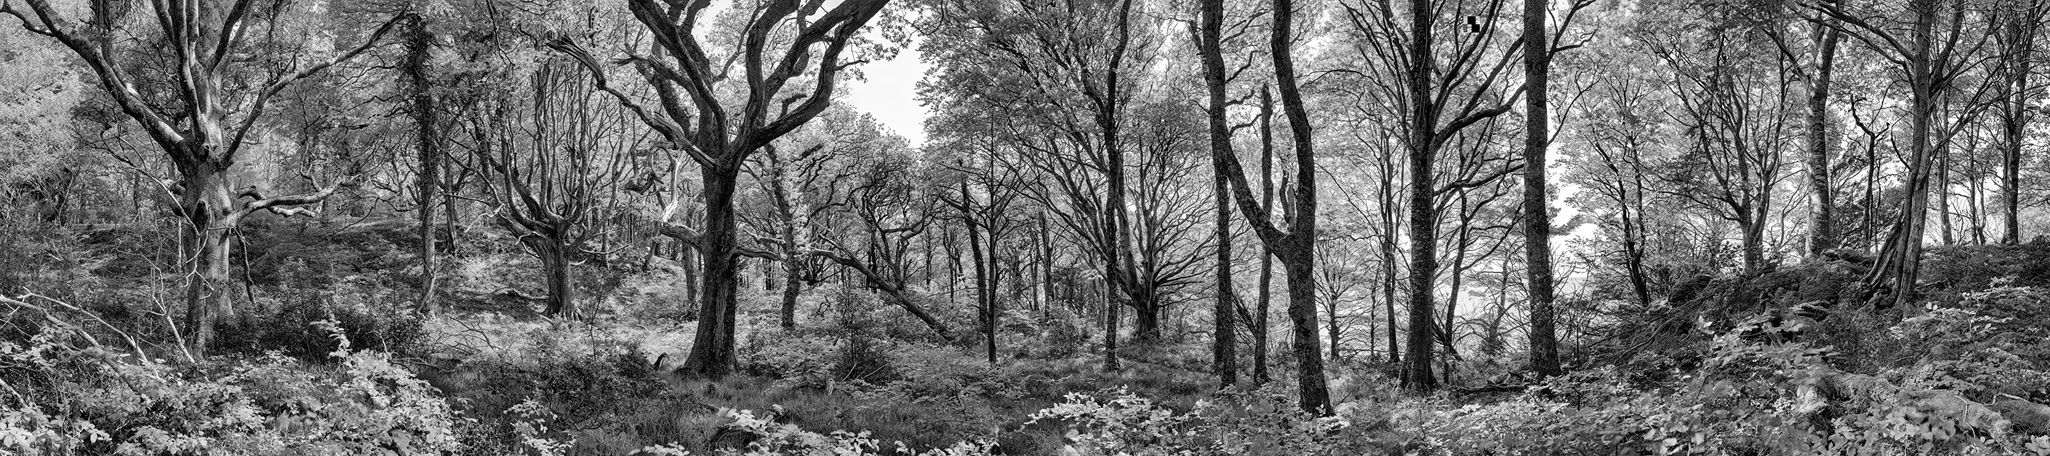 Ross island Forest black and white forest photo